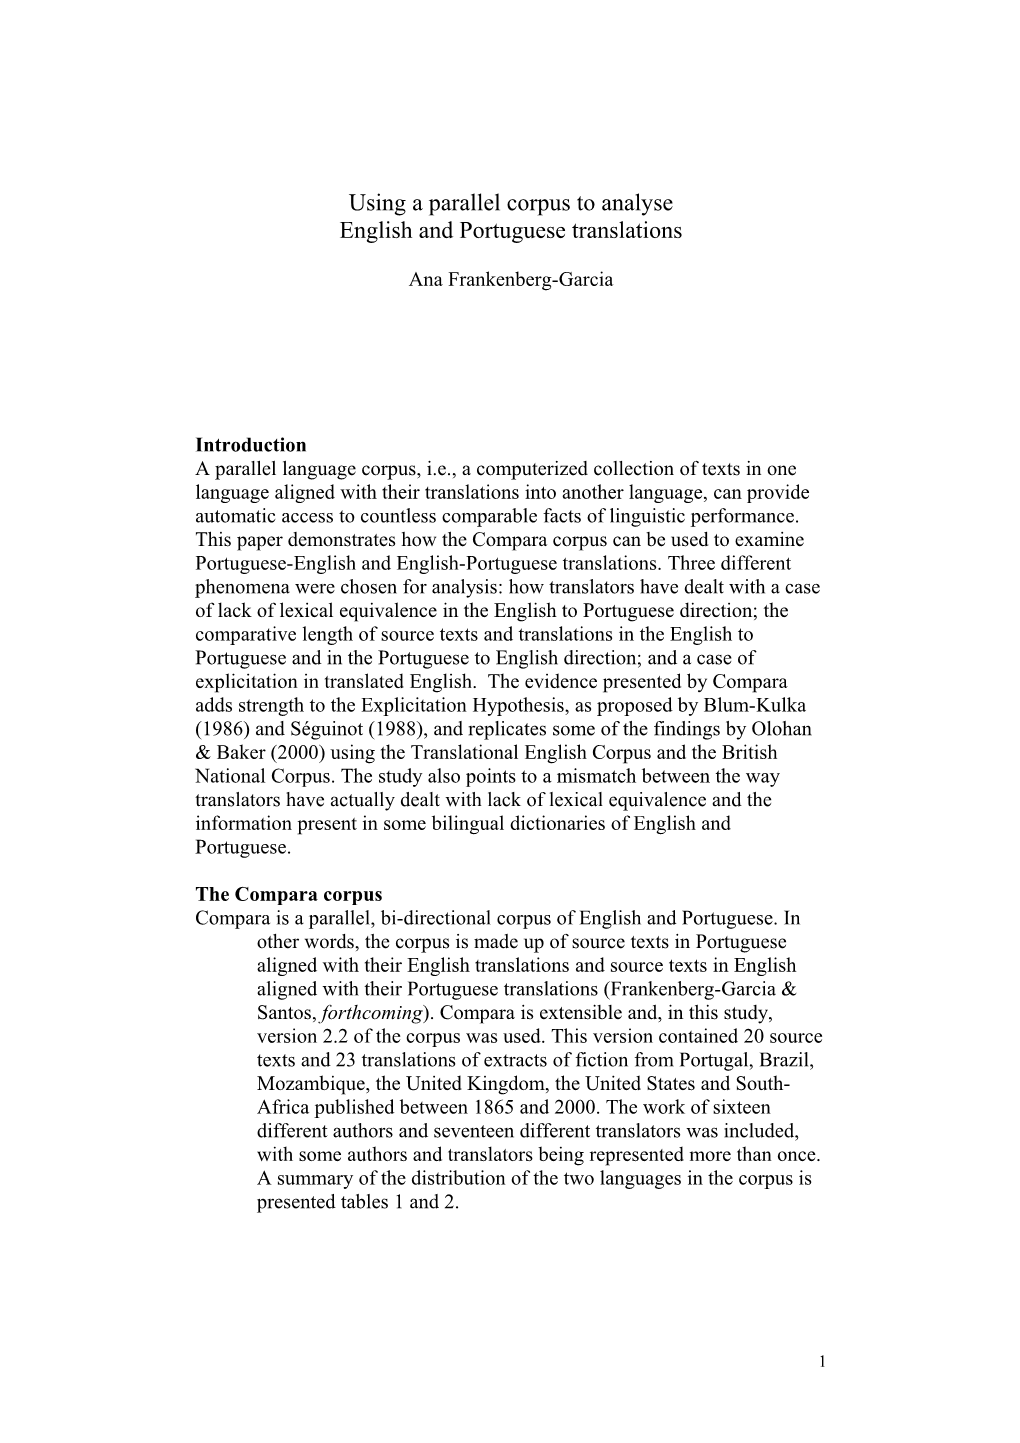 Using a Parallel Corpus to Examine English and Portuguese Translations